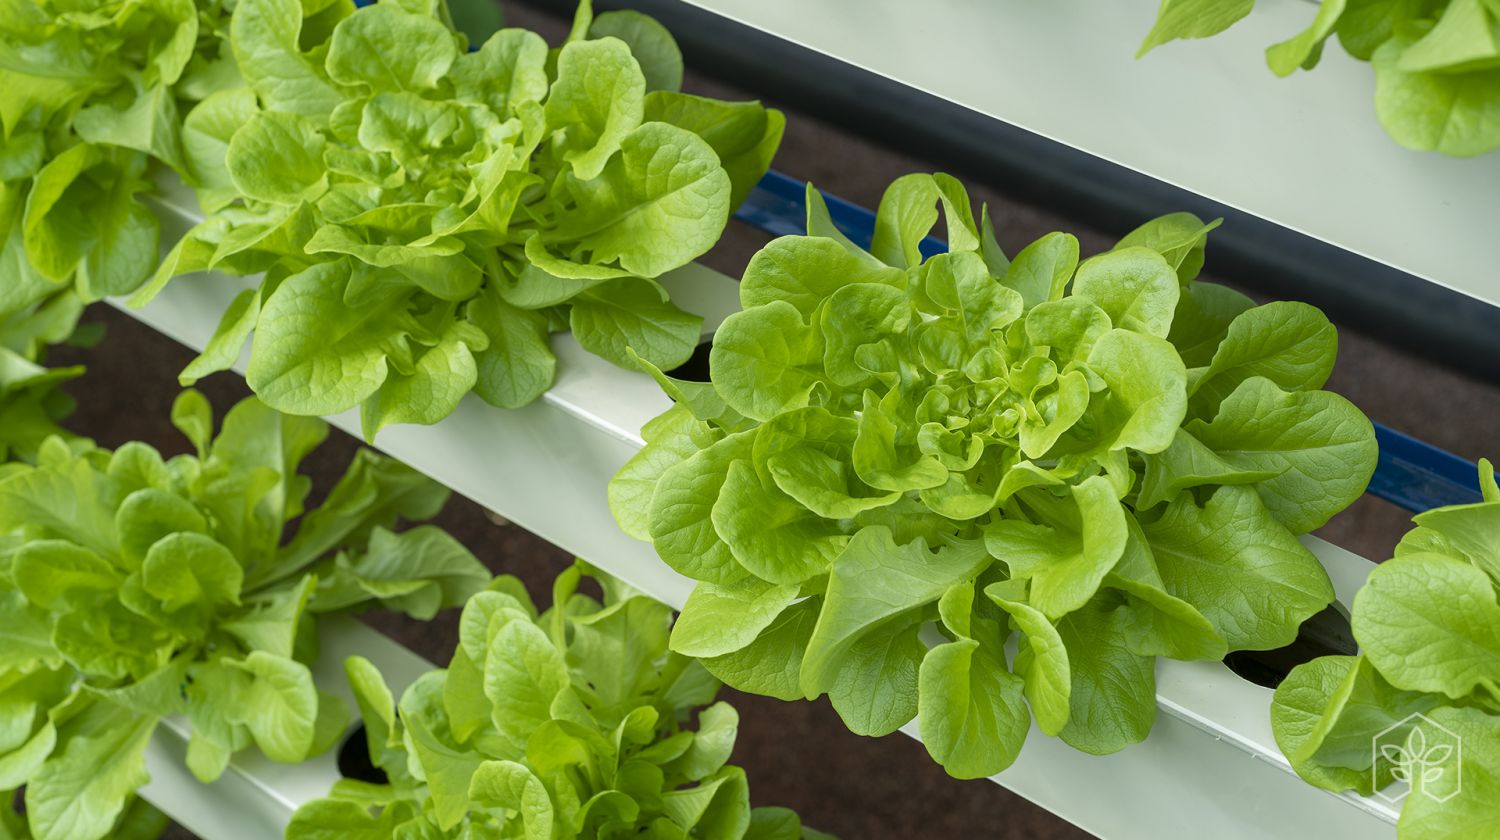 Aquaponic cultivation versus conventional hydroponic cultivation